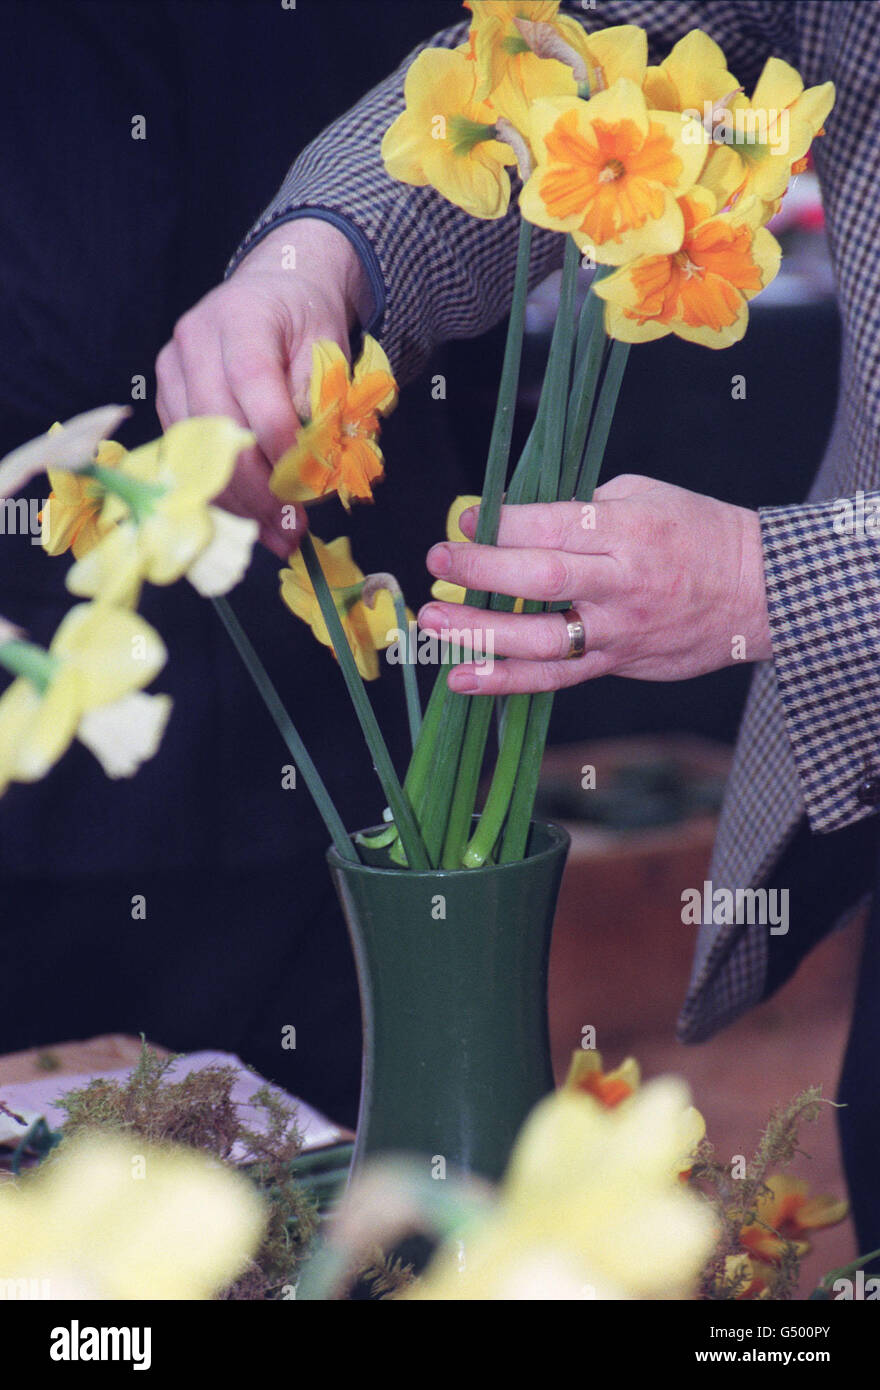 Royal Horticultural Flower Show Foto Stock